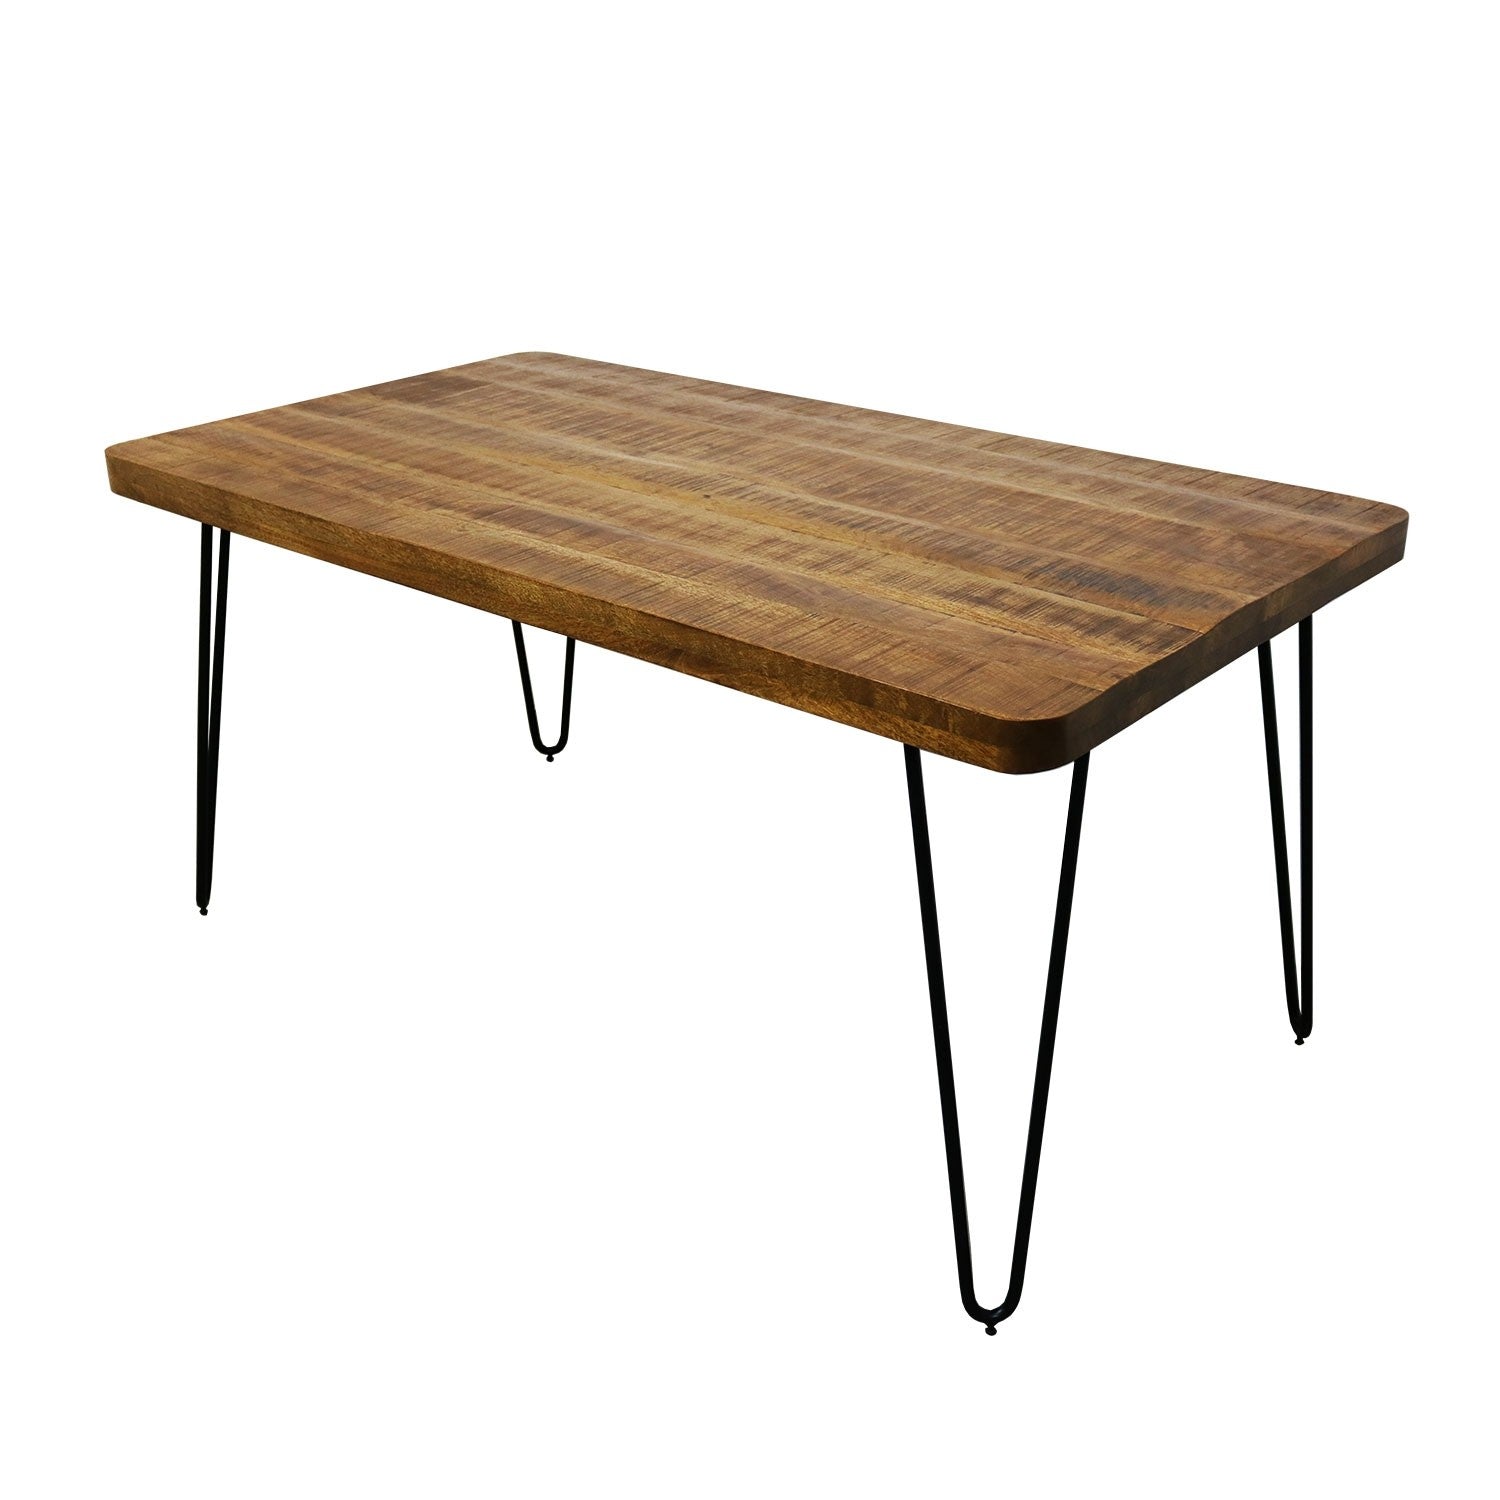 Kick dining table Triangle - 180cm